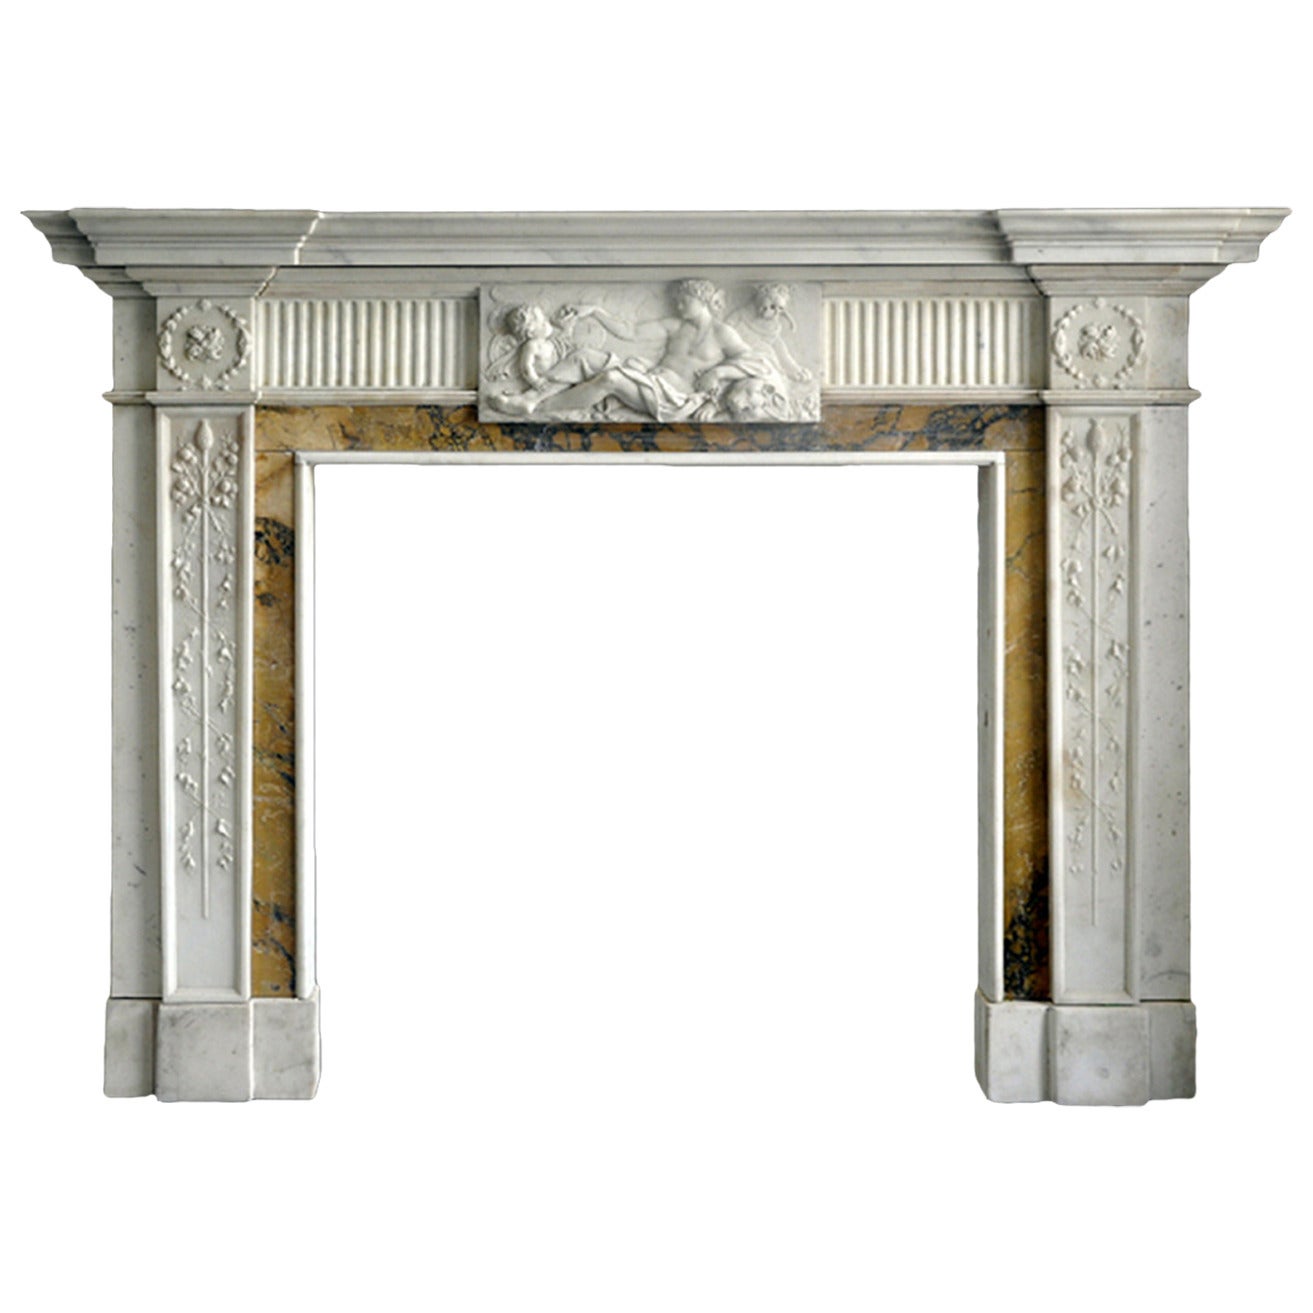 19th Century Georgian Mantel with Sienna Ingrounds and Carved Relief